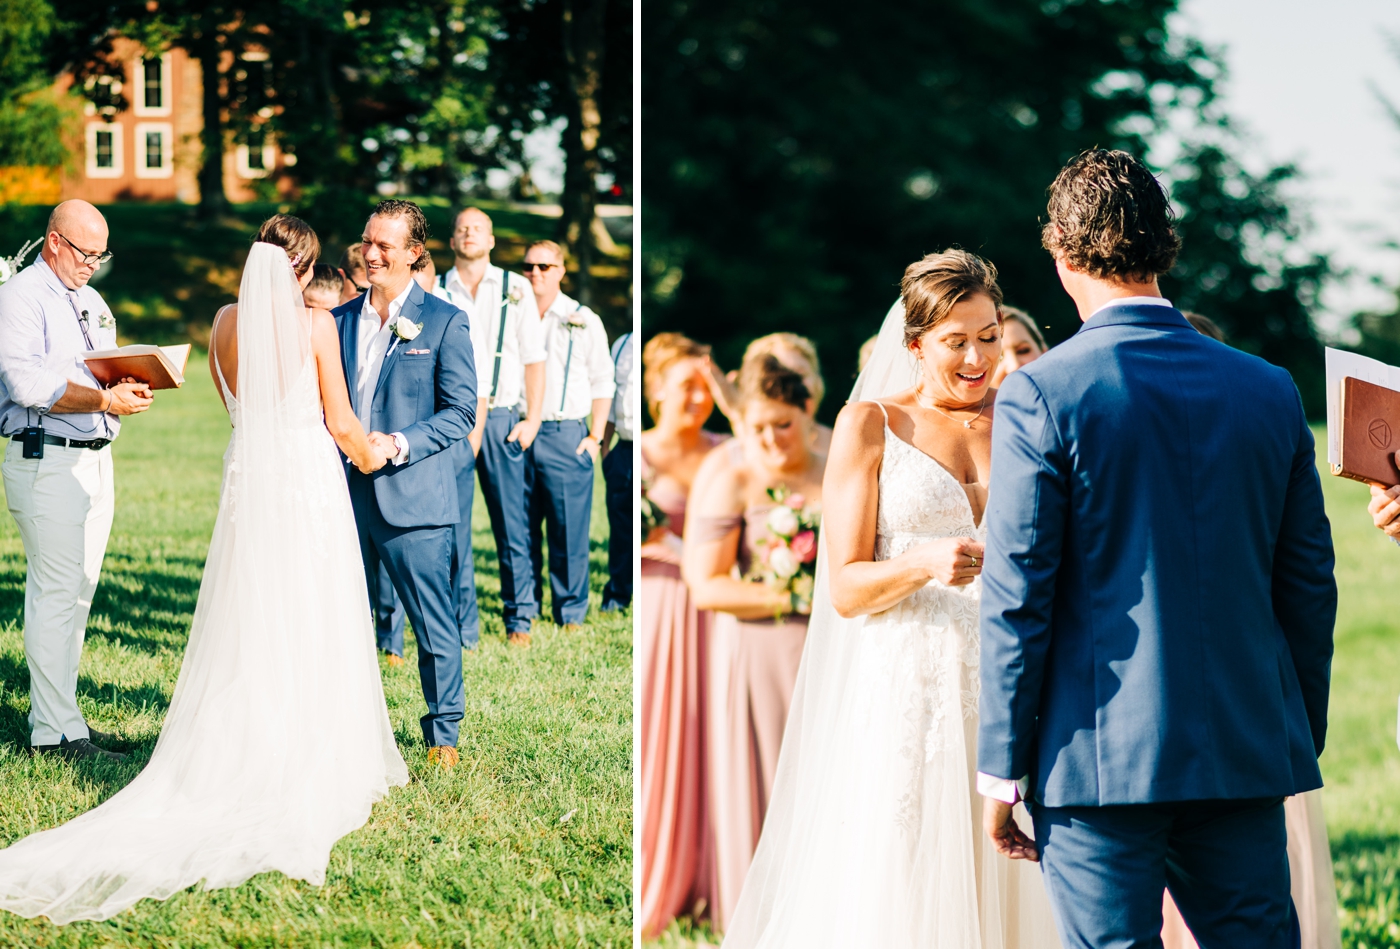 Outdoor wedding ceremony on the lawn at The White Silo Barn